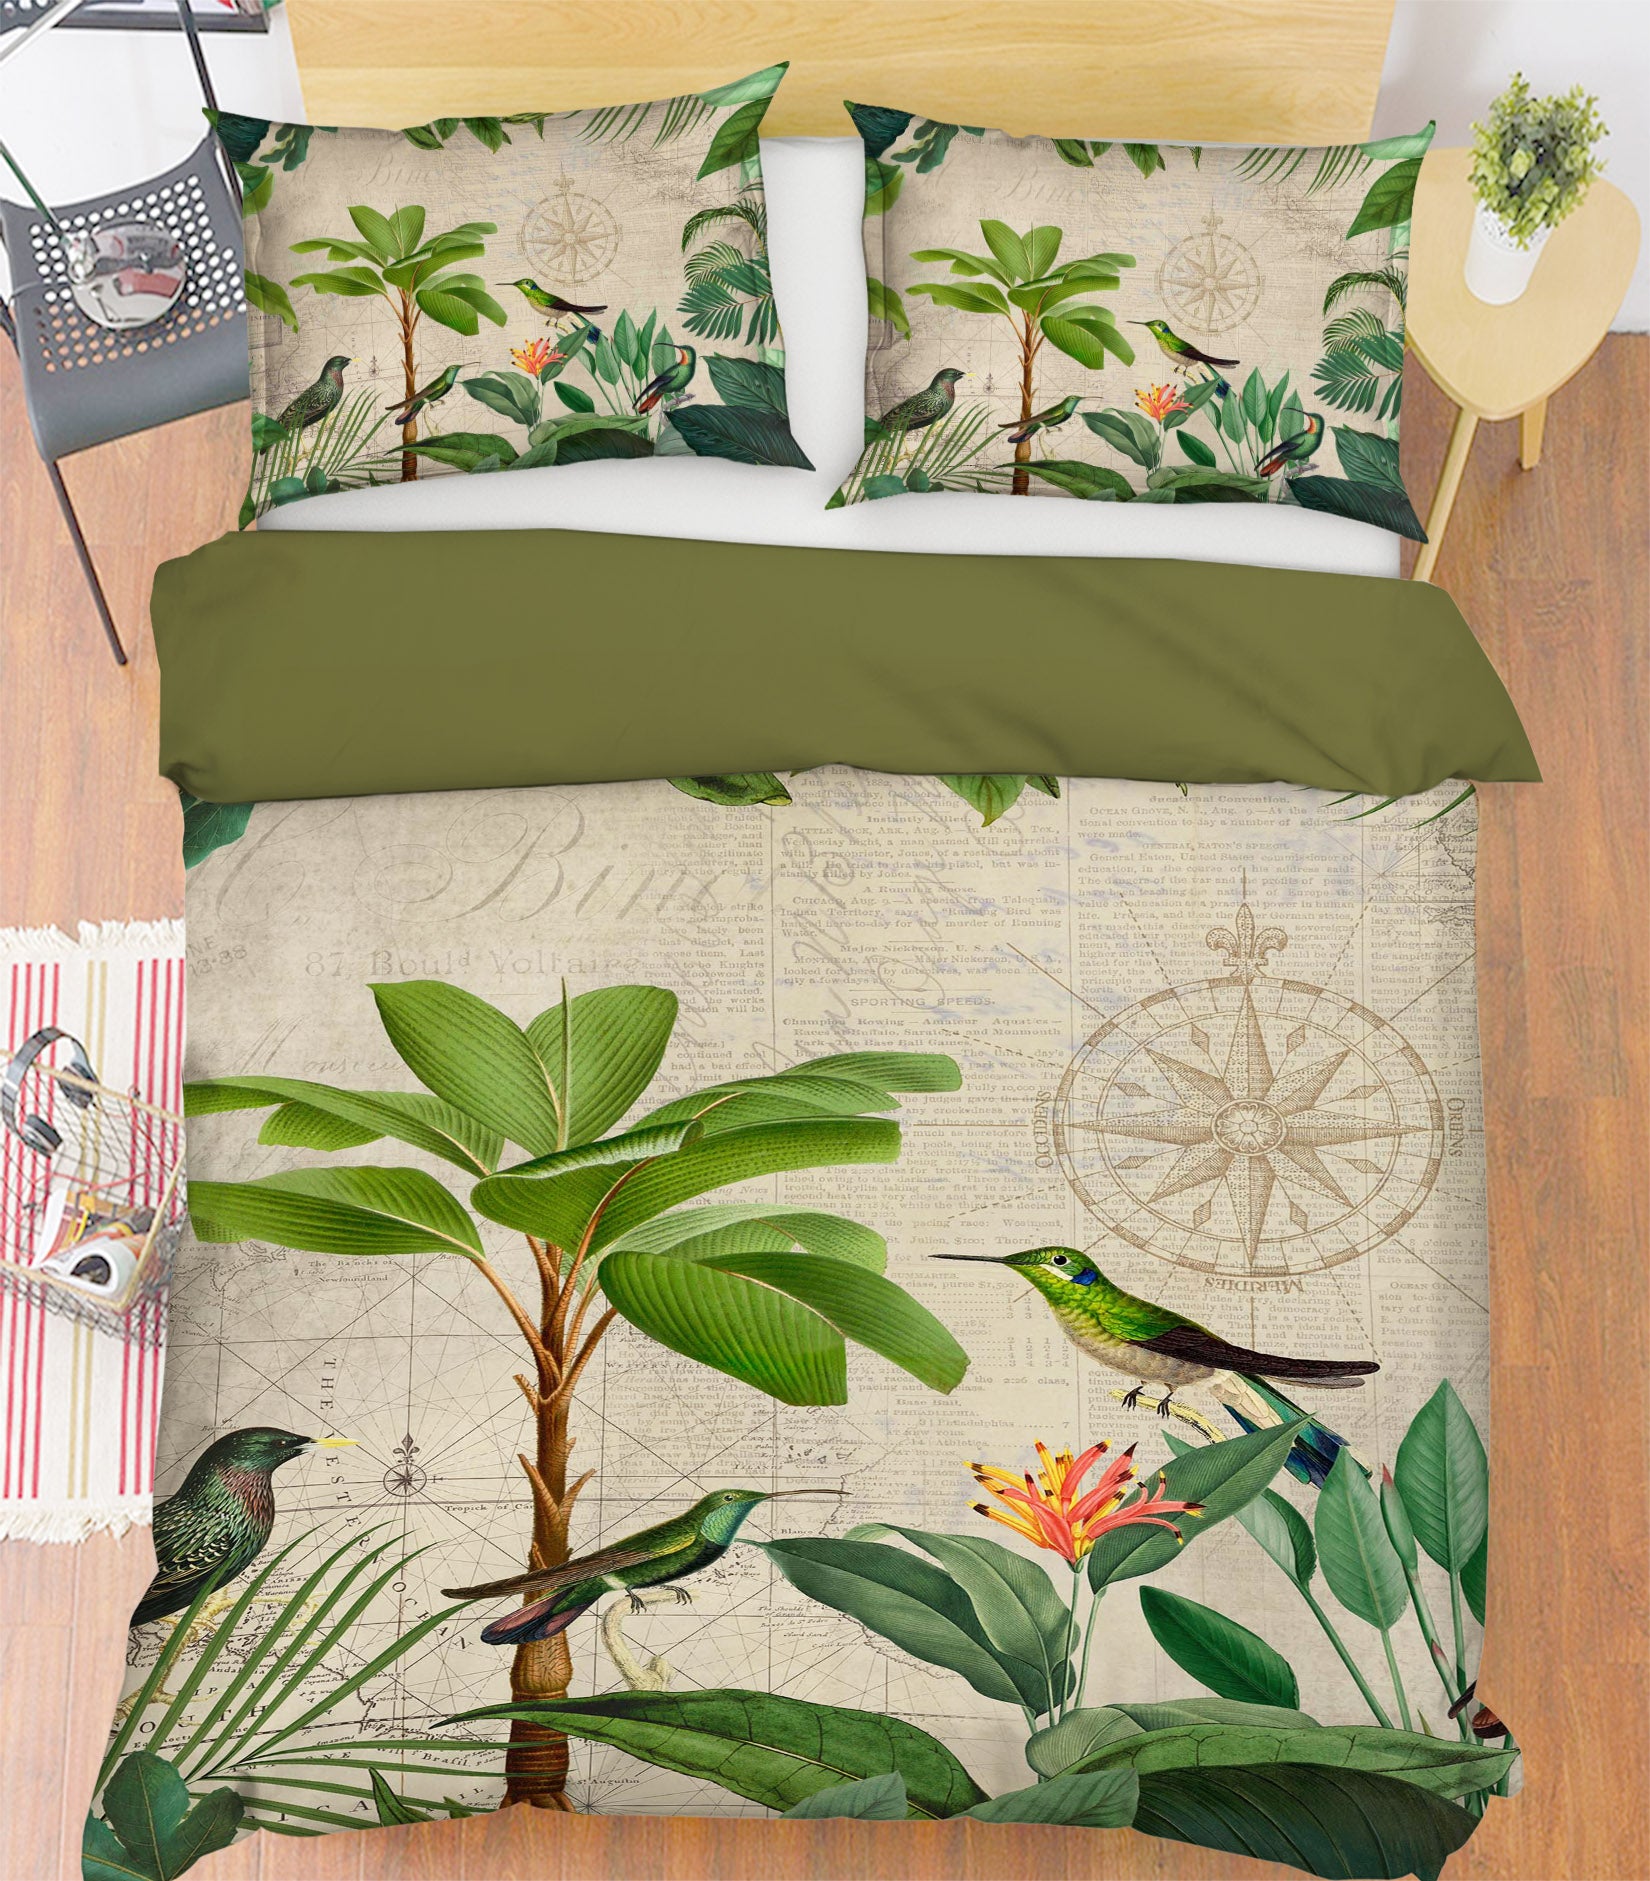 3D Coconut Tree Bird 120 Andrea haase Bedding Bed Pillowcases Quilt